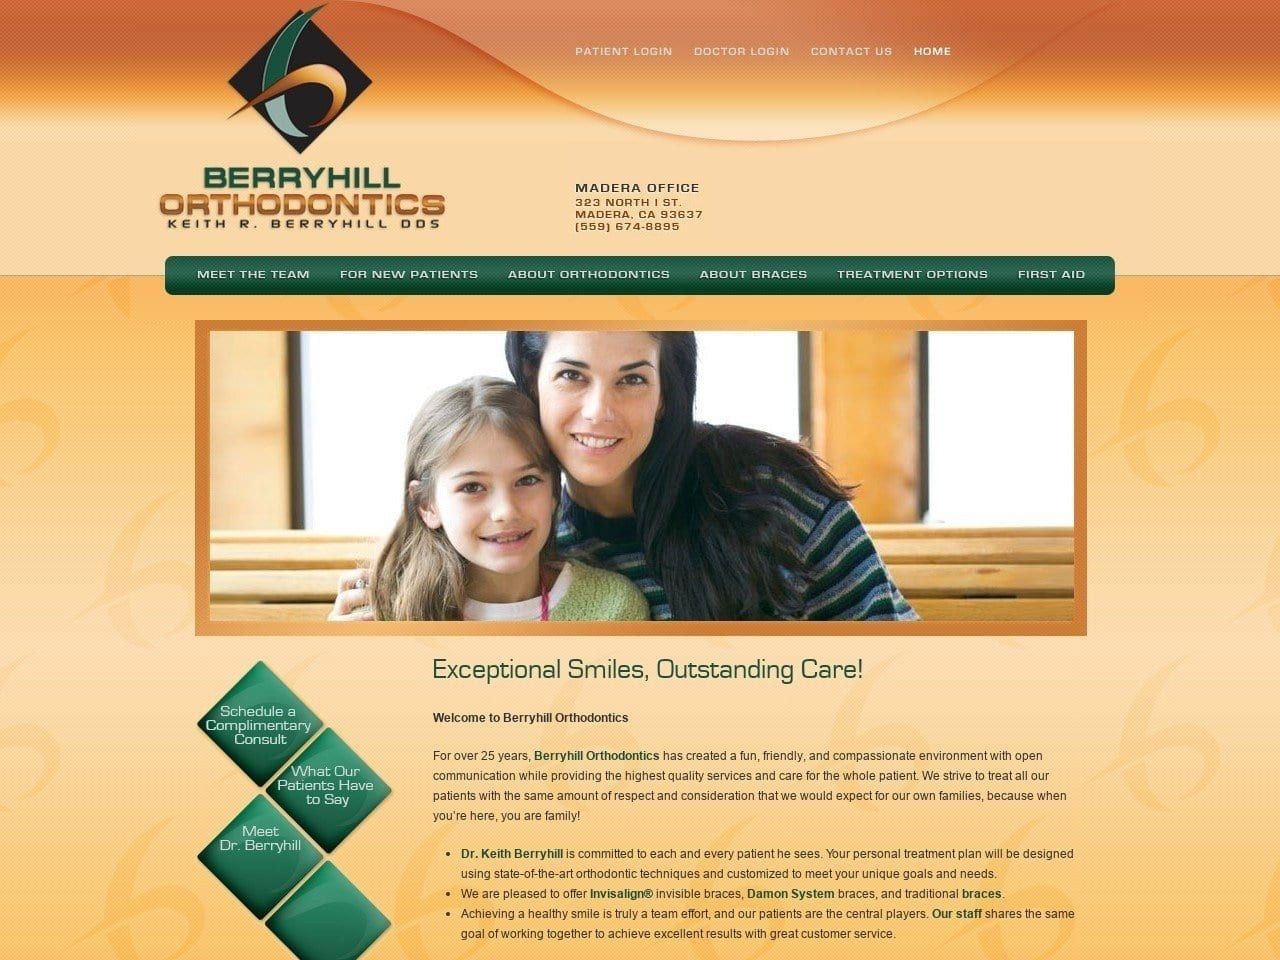 Berryhill Keith R DDS Website Screenshot from berryhillortho.com